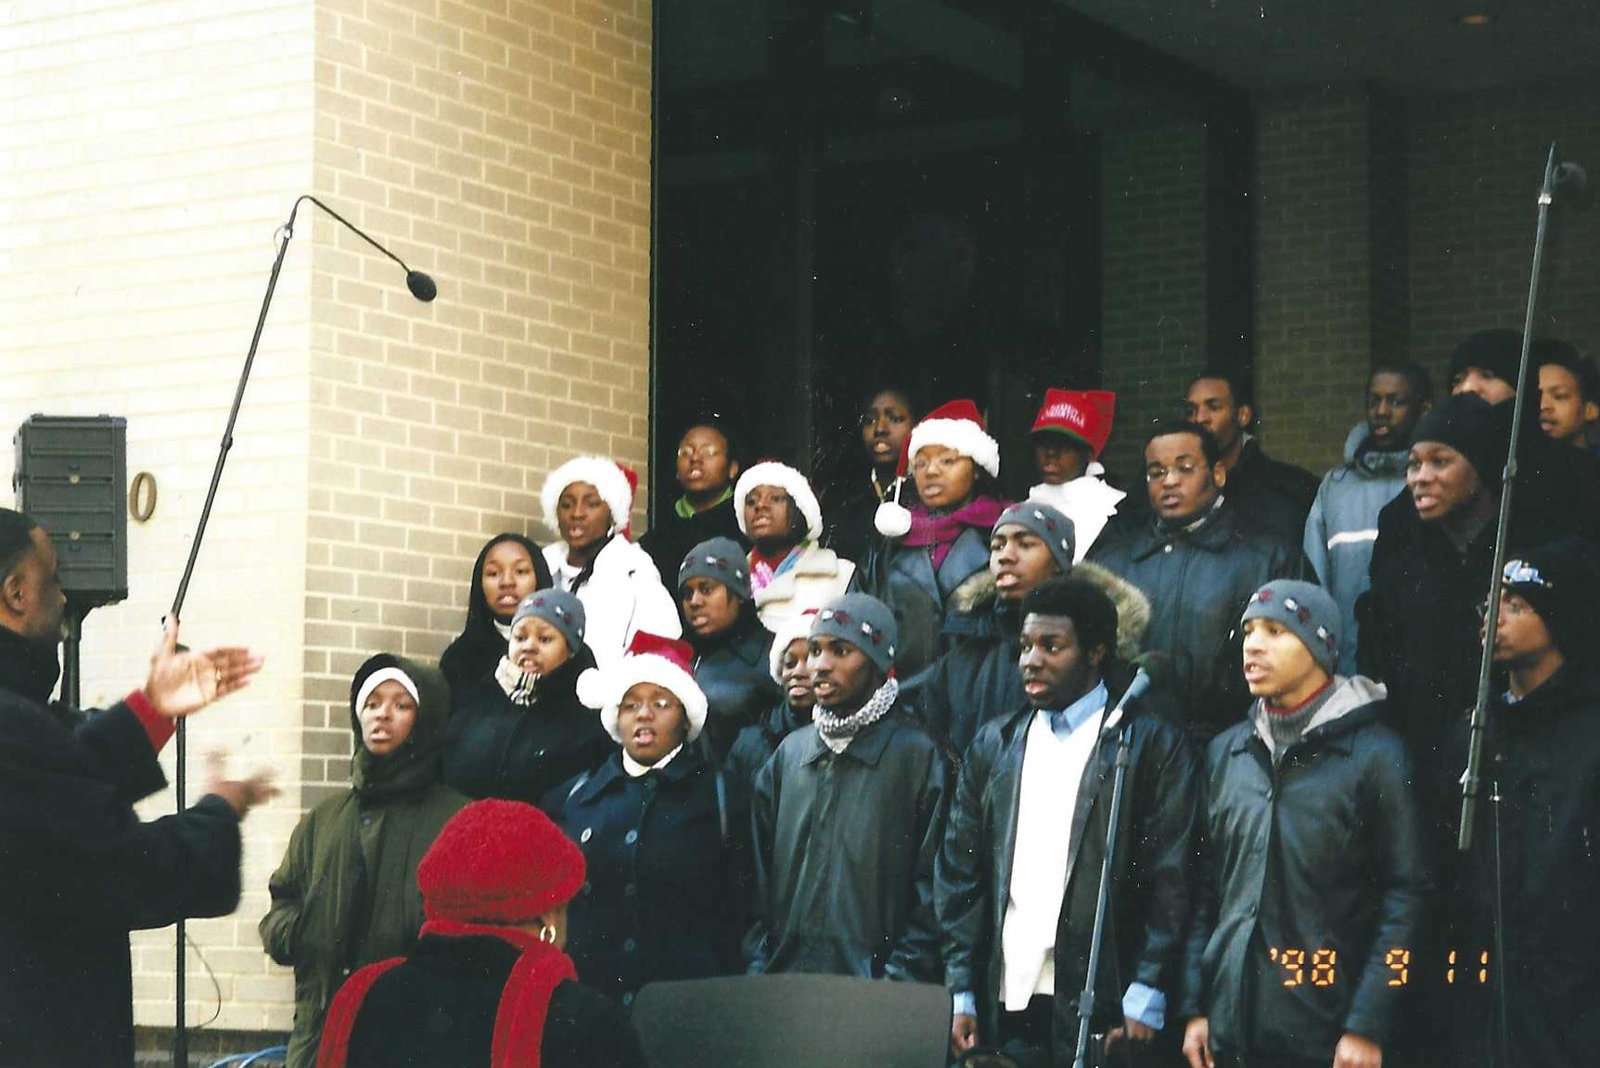 1998 Singing on the steps of the Washington Post